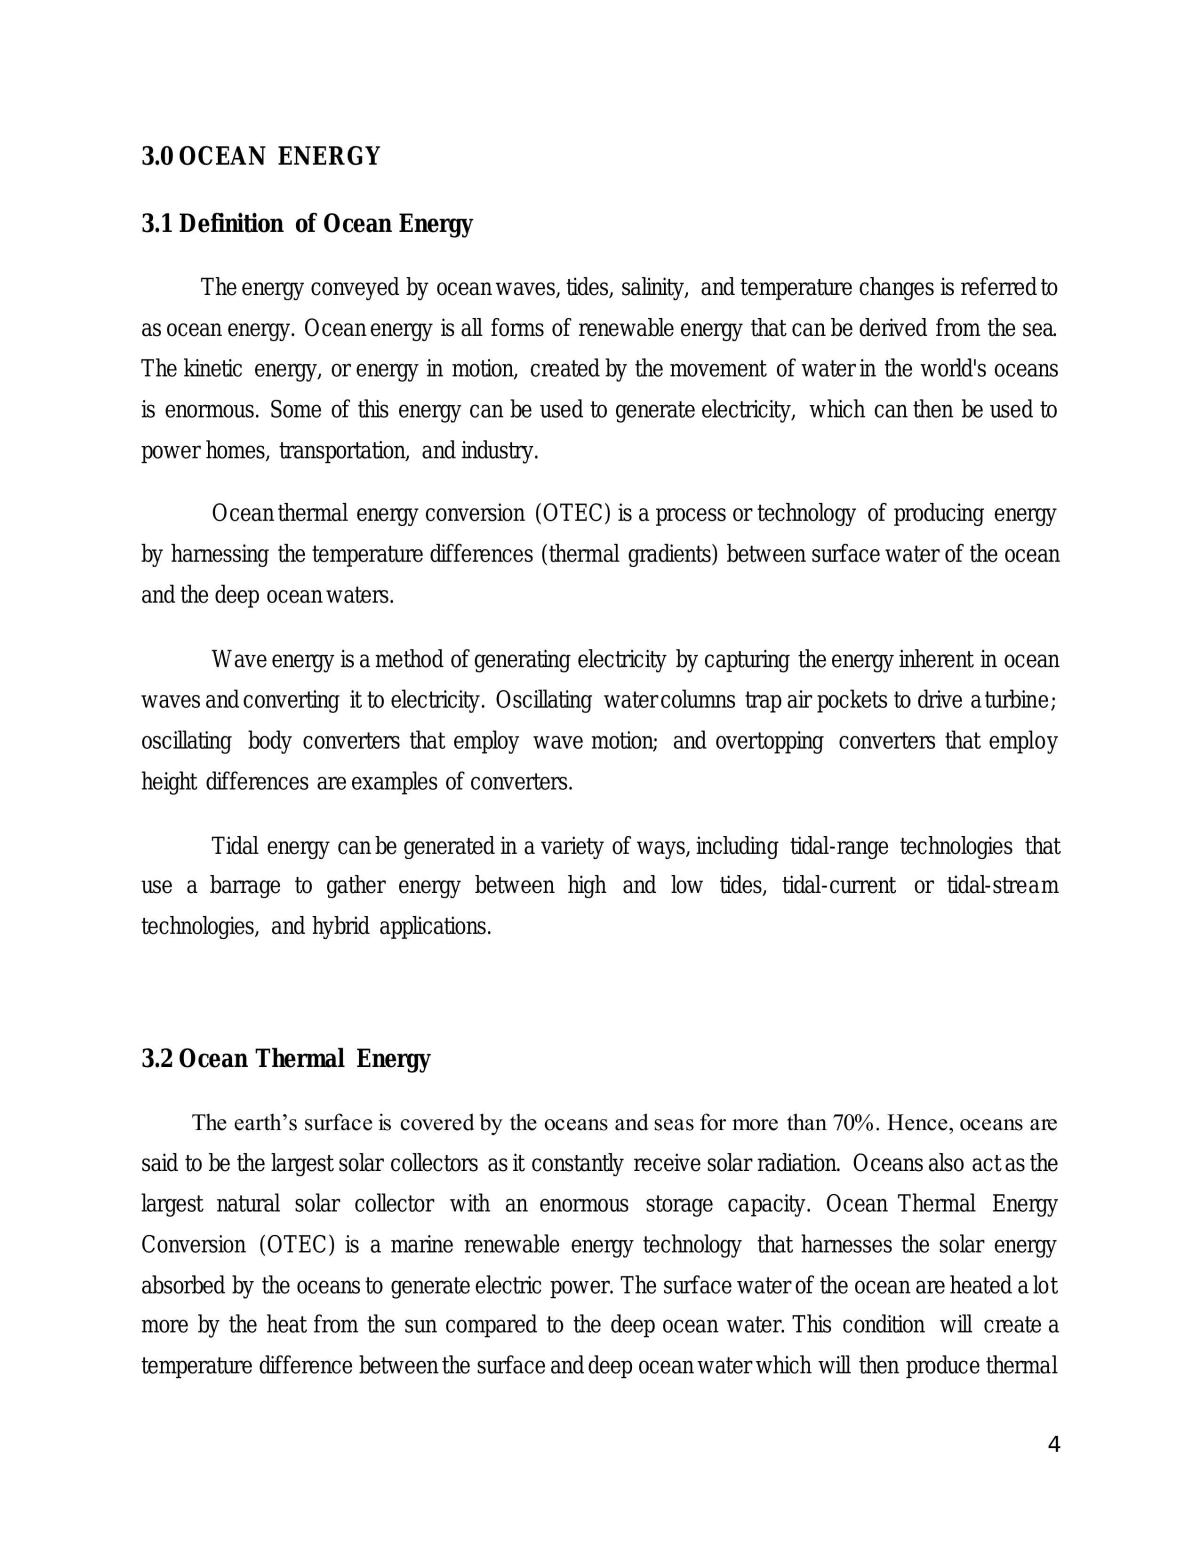 Energy from Ocean - Page 3